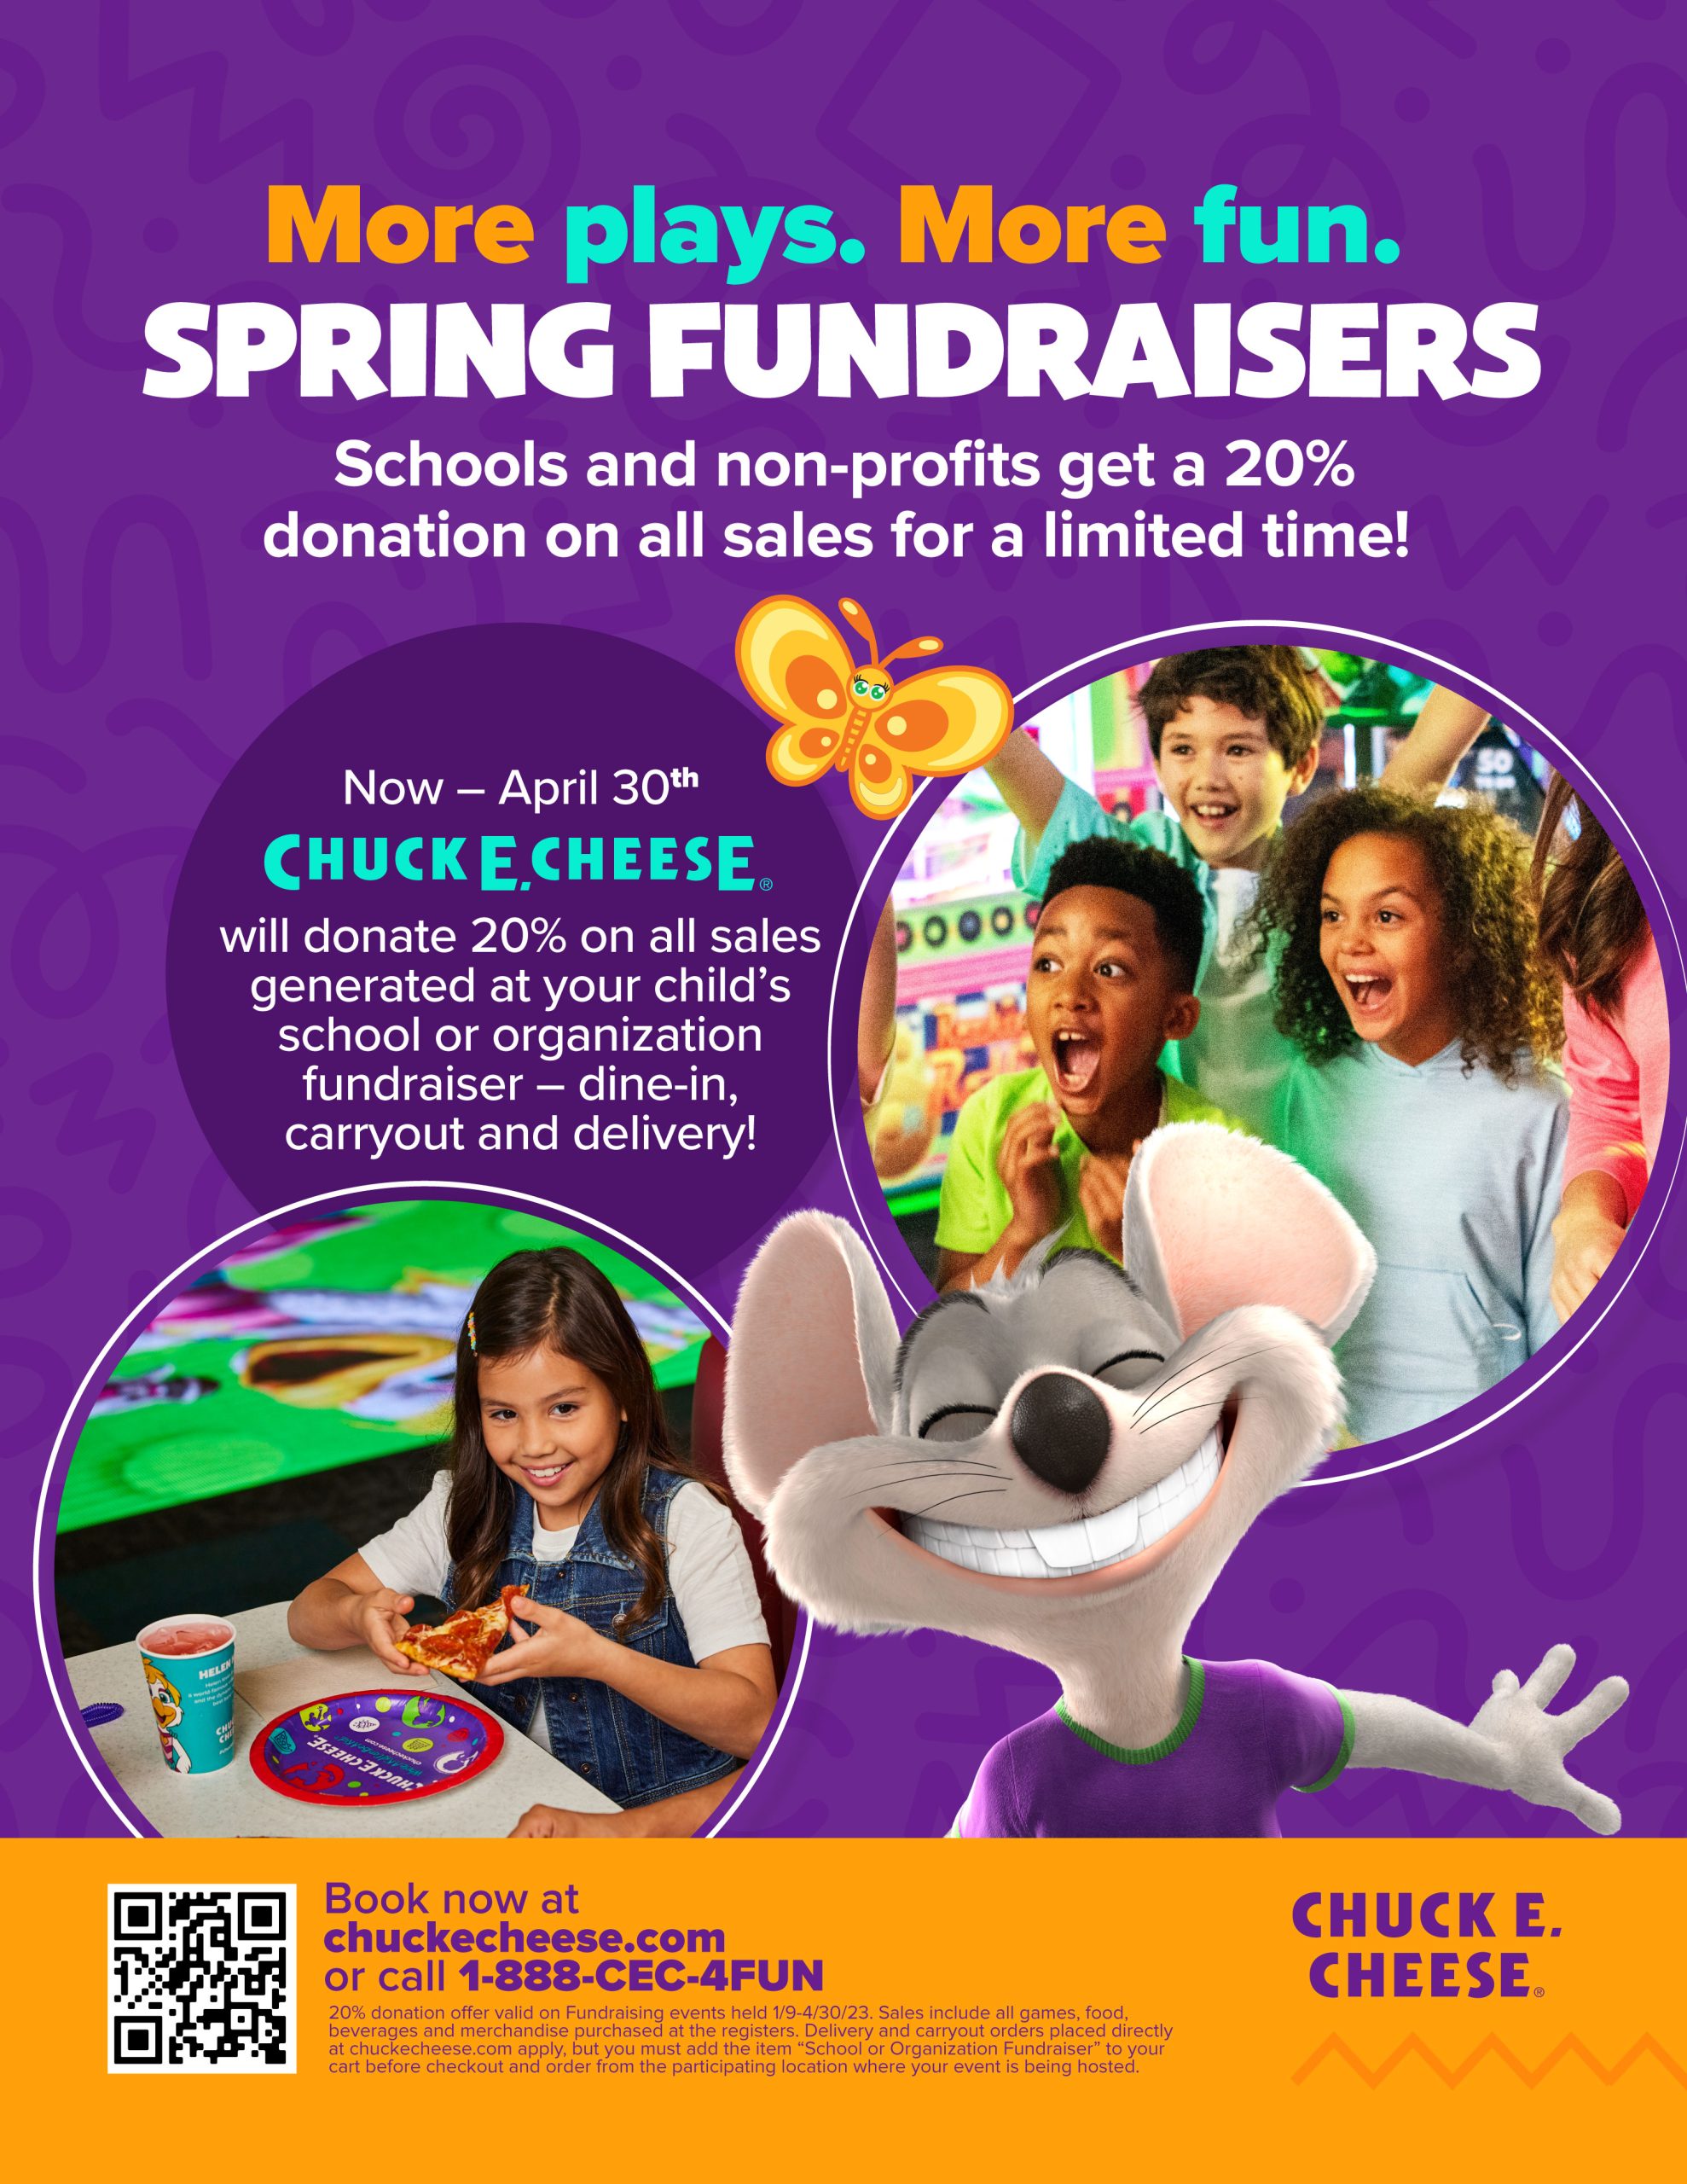 Spring Fundraisers at Chuck E. Cheese! Festival at BelAir